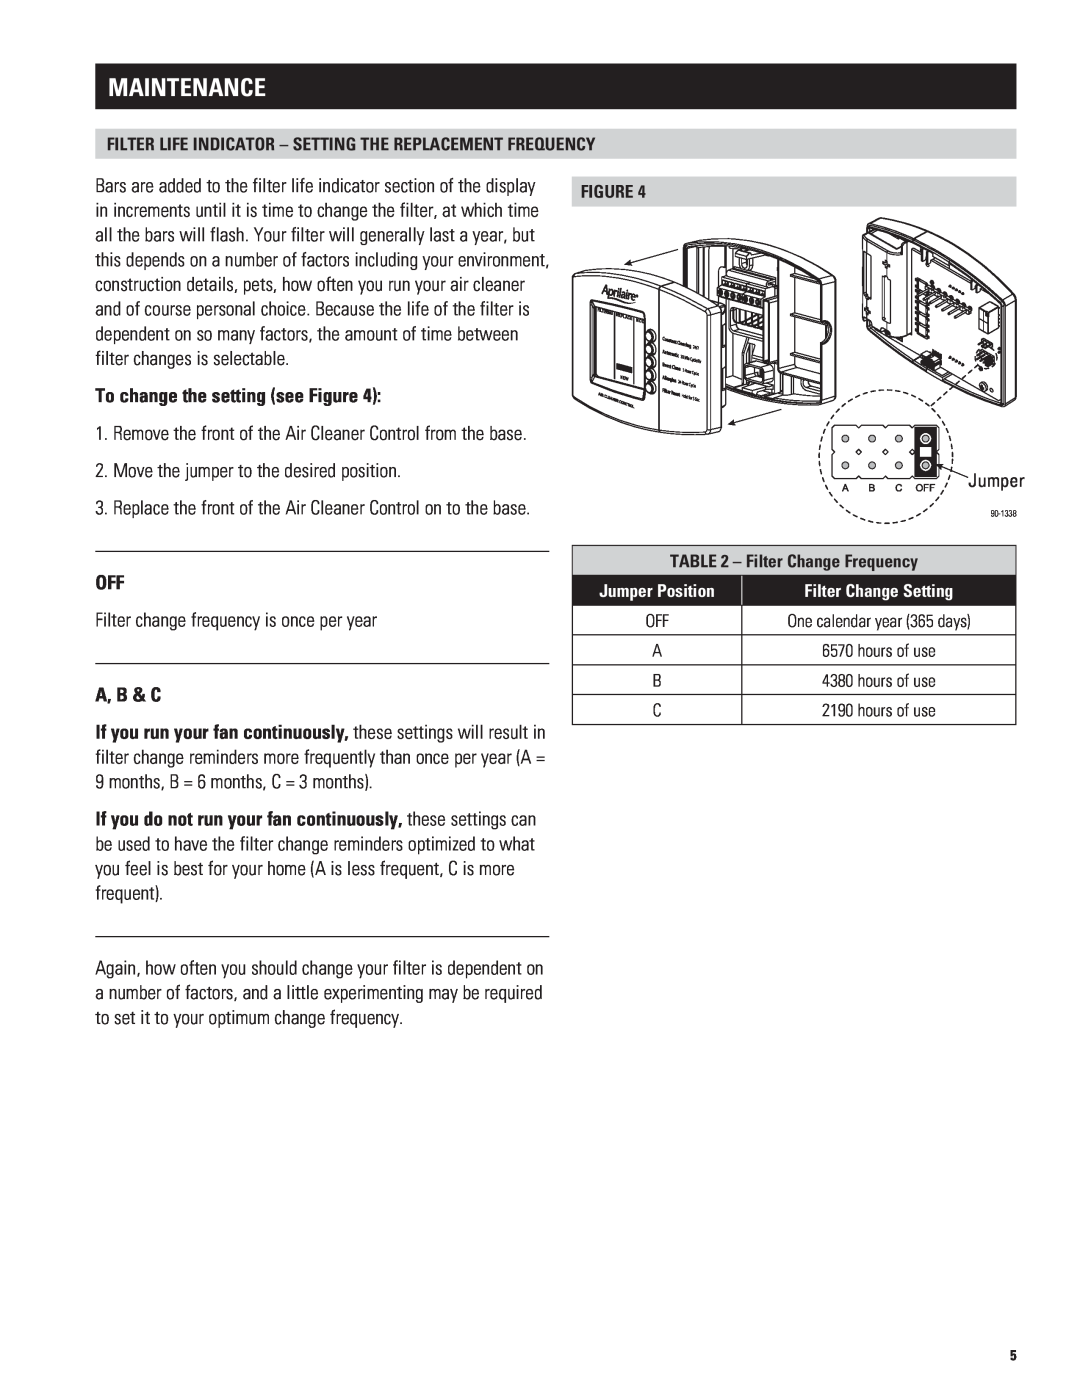 Aprilaire 4300 owner manual Maintenance, To change the setting see Figure, A, B & C, Jumper, Filter Change Frequency 